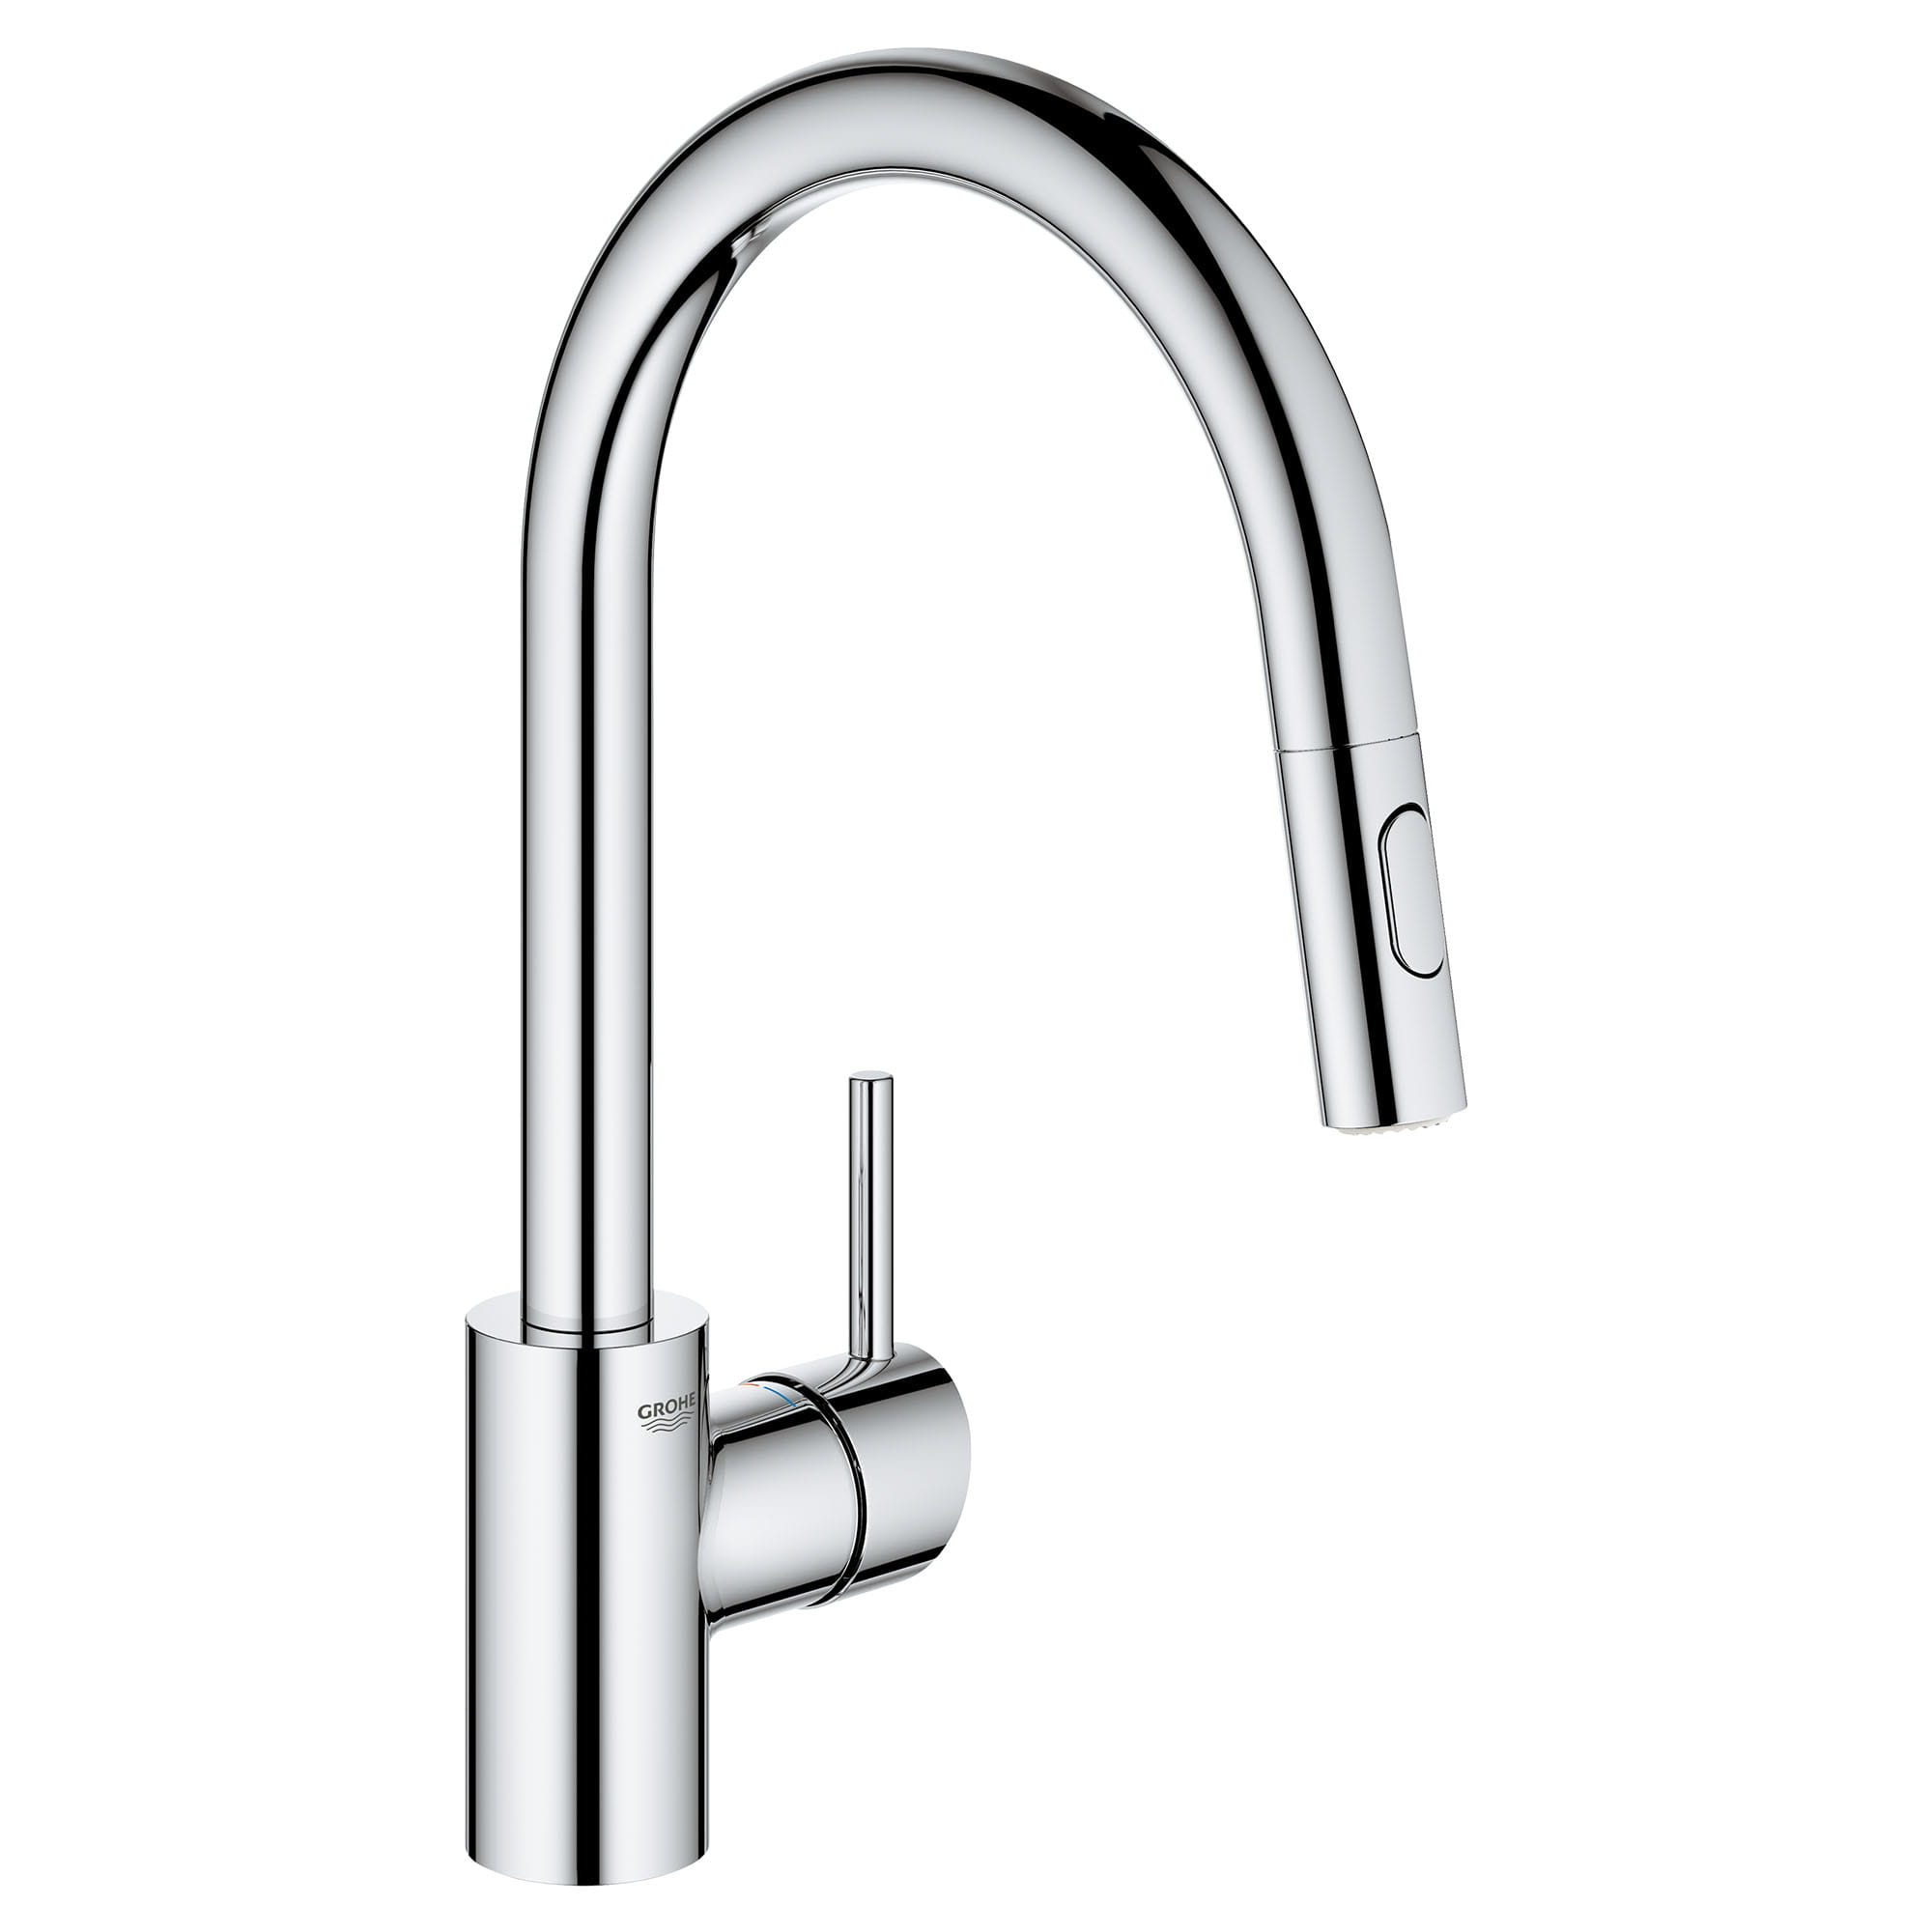 CONCETTO™  CONCETTO SINGLE-HANDLE PULL-DOWN KITCHEN FAUCET DUAL SPRAY 1.75 GPM Model: 32665003-related